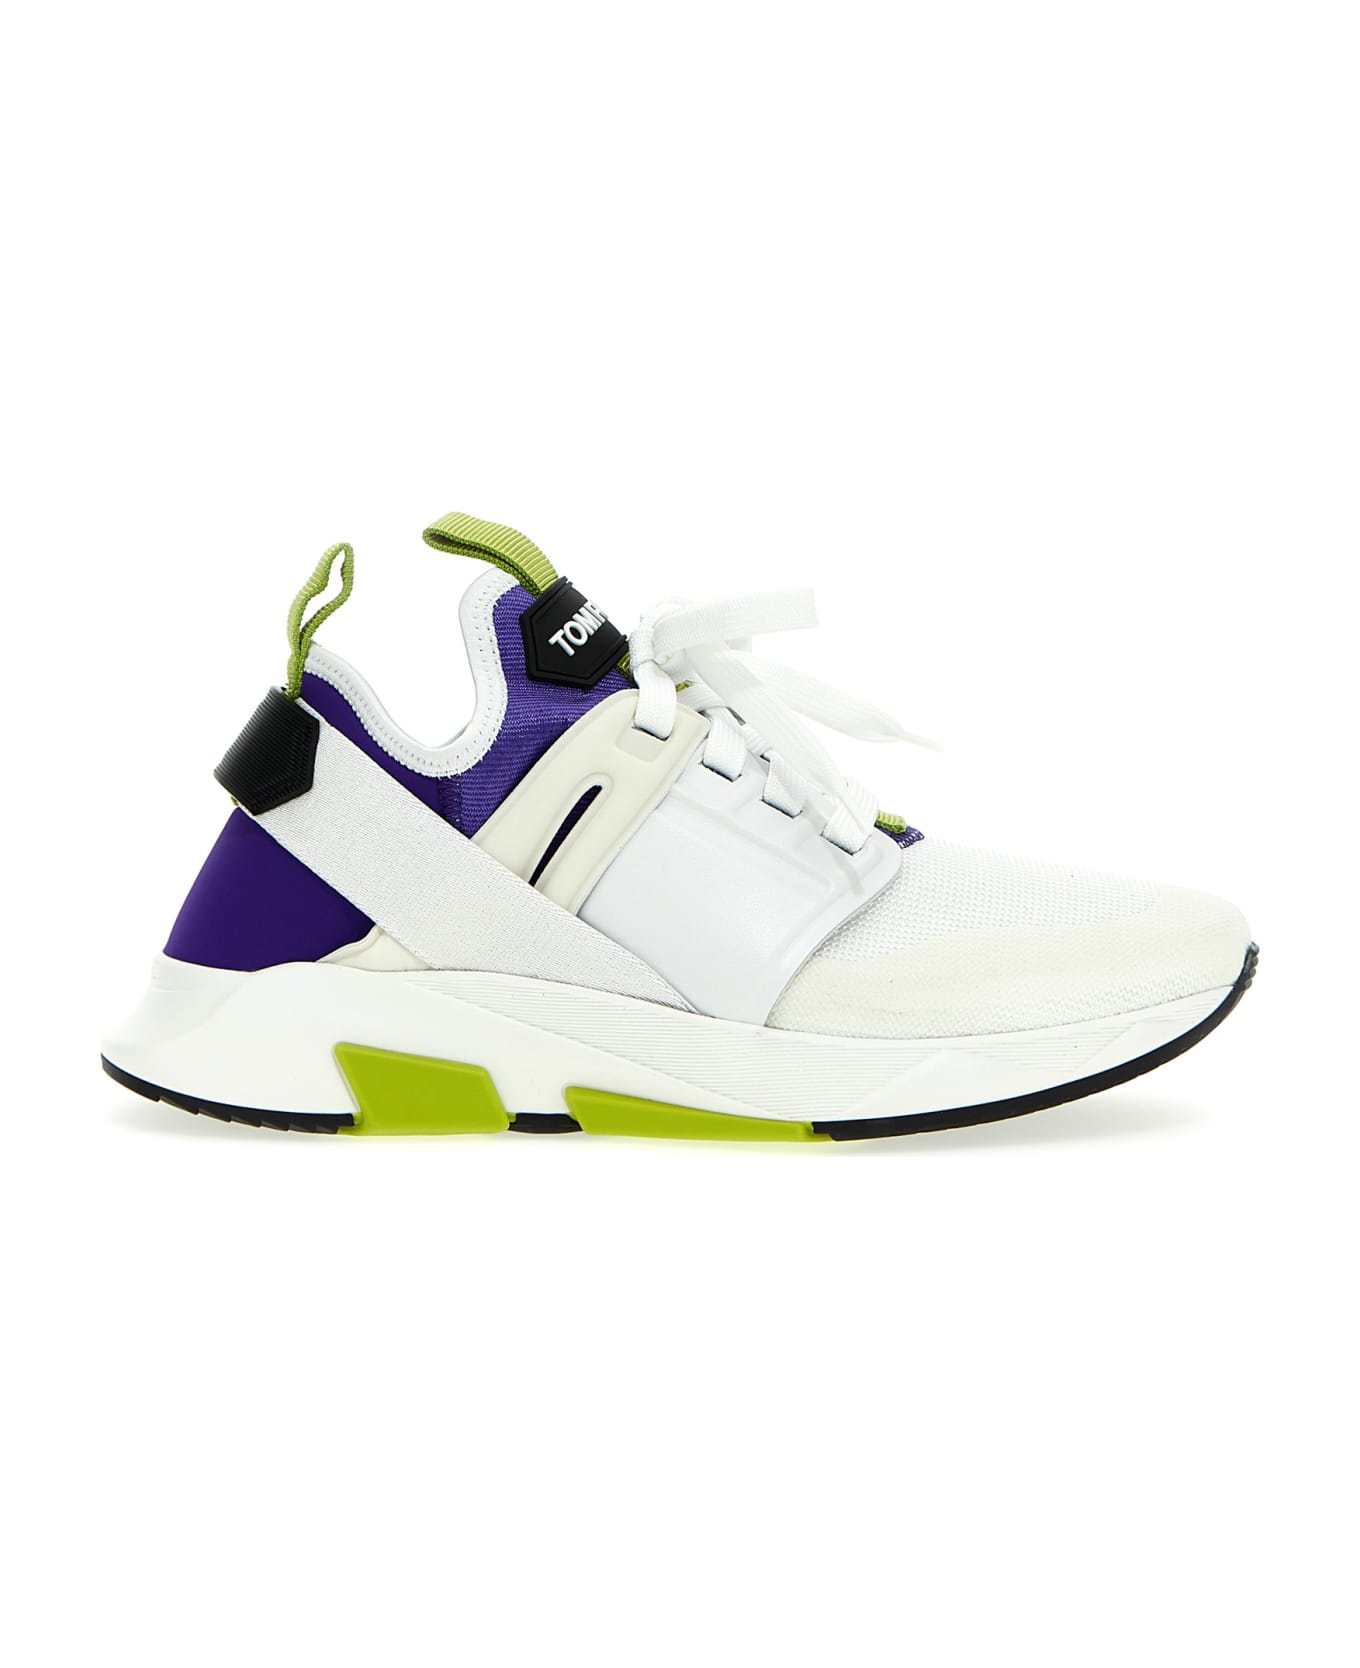 Tom Ford Low Sneakers - White スニーカー